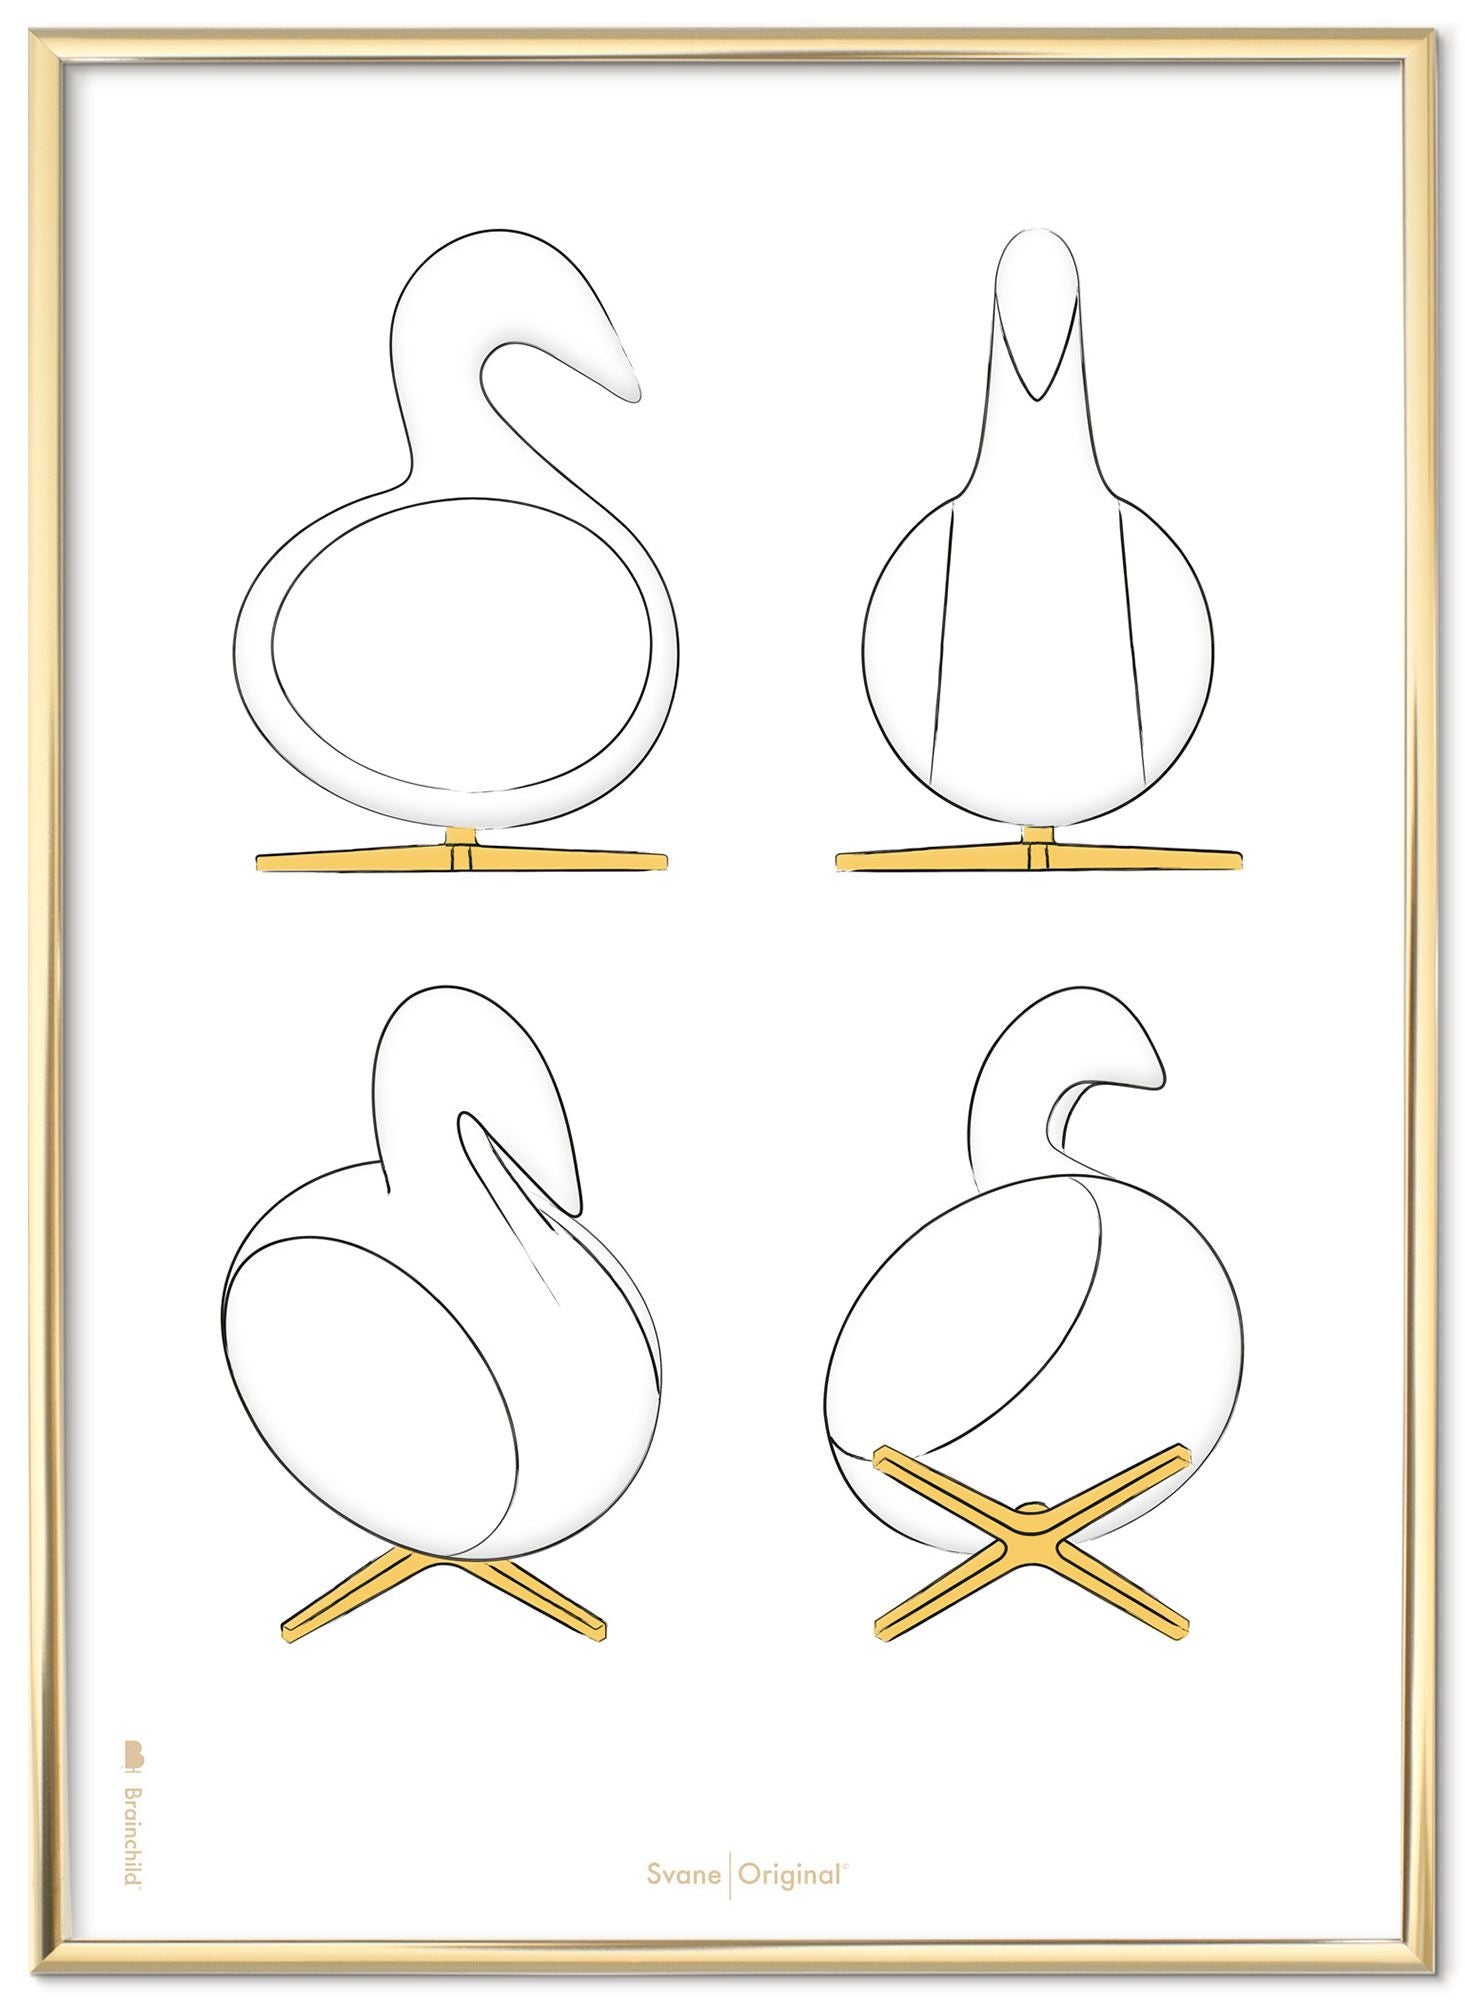 Brainchild Swan Design Sketches Poster Frame Made Of Brass Colored Metal A5, White Background